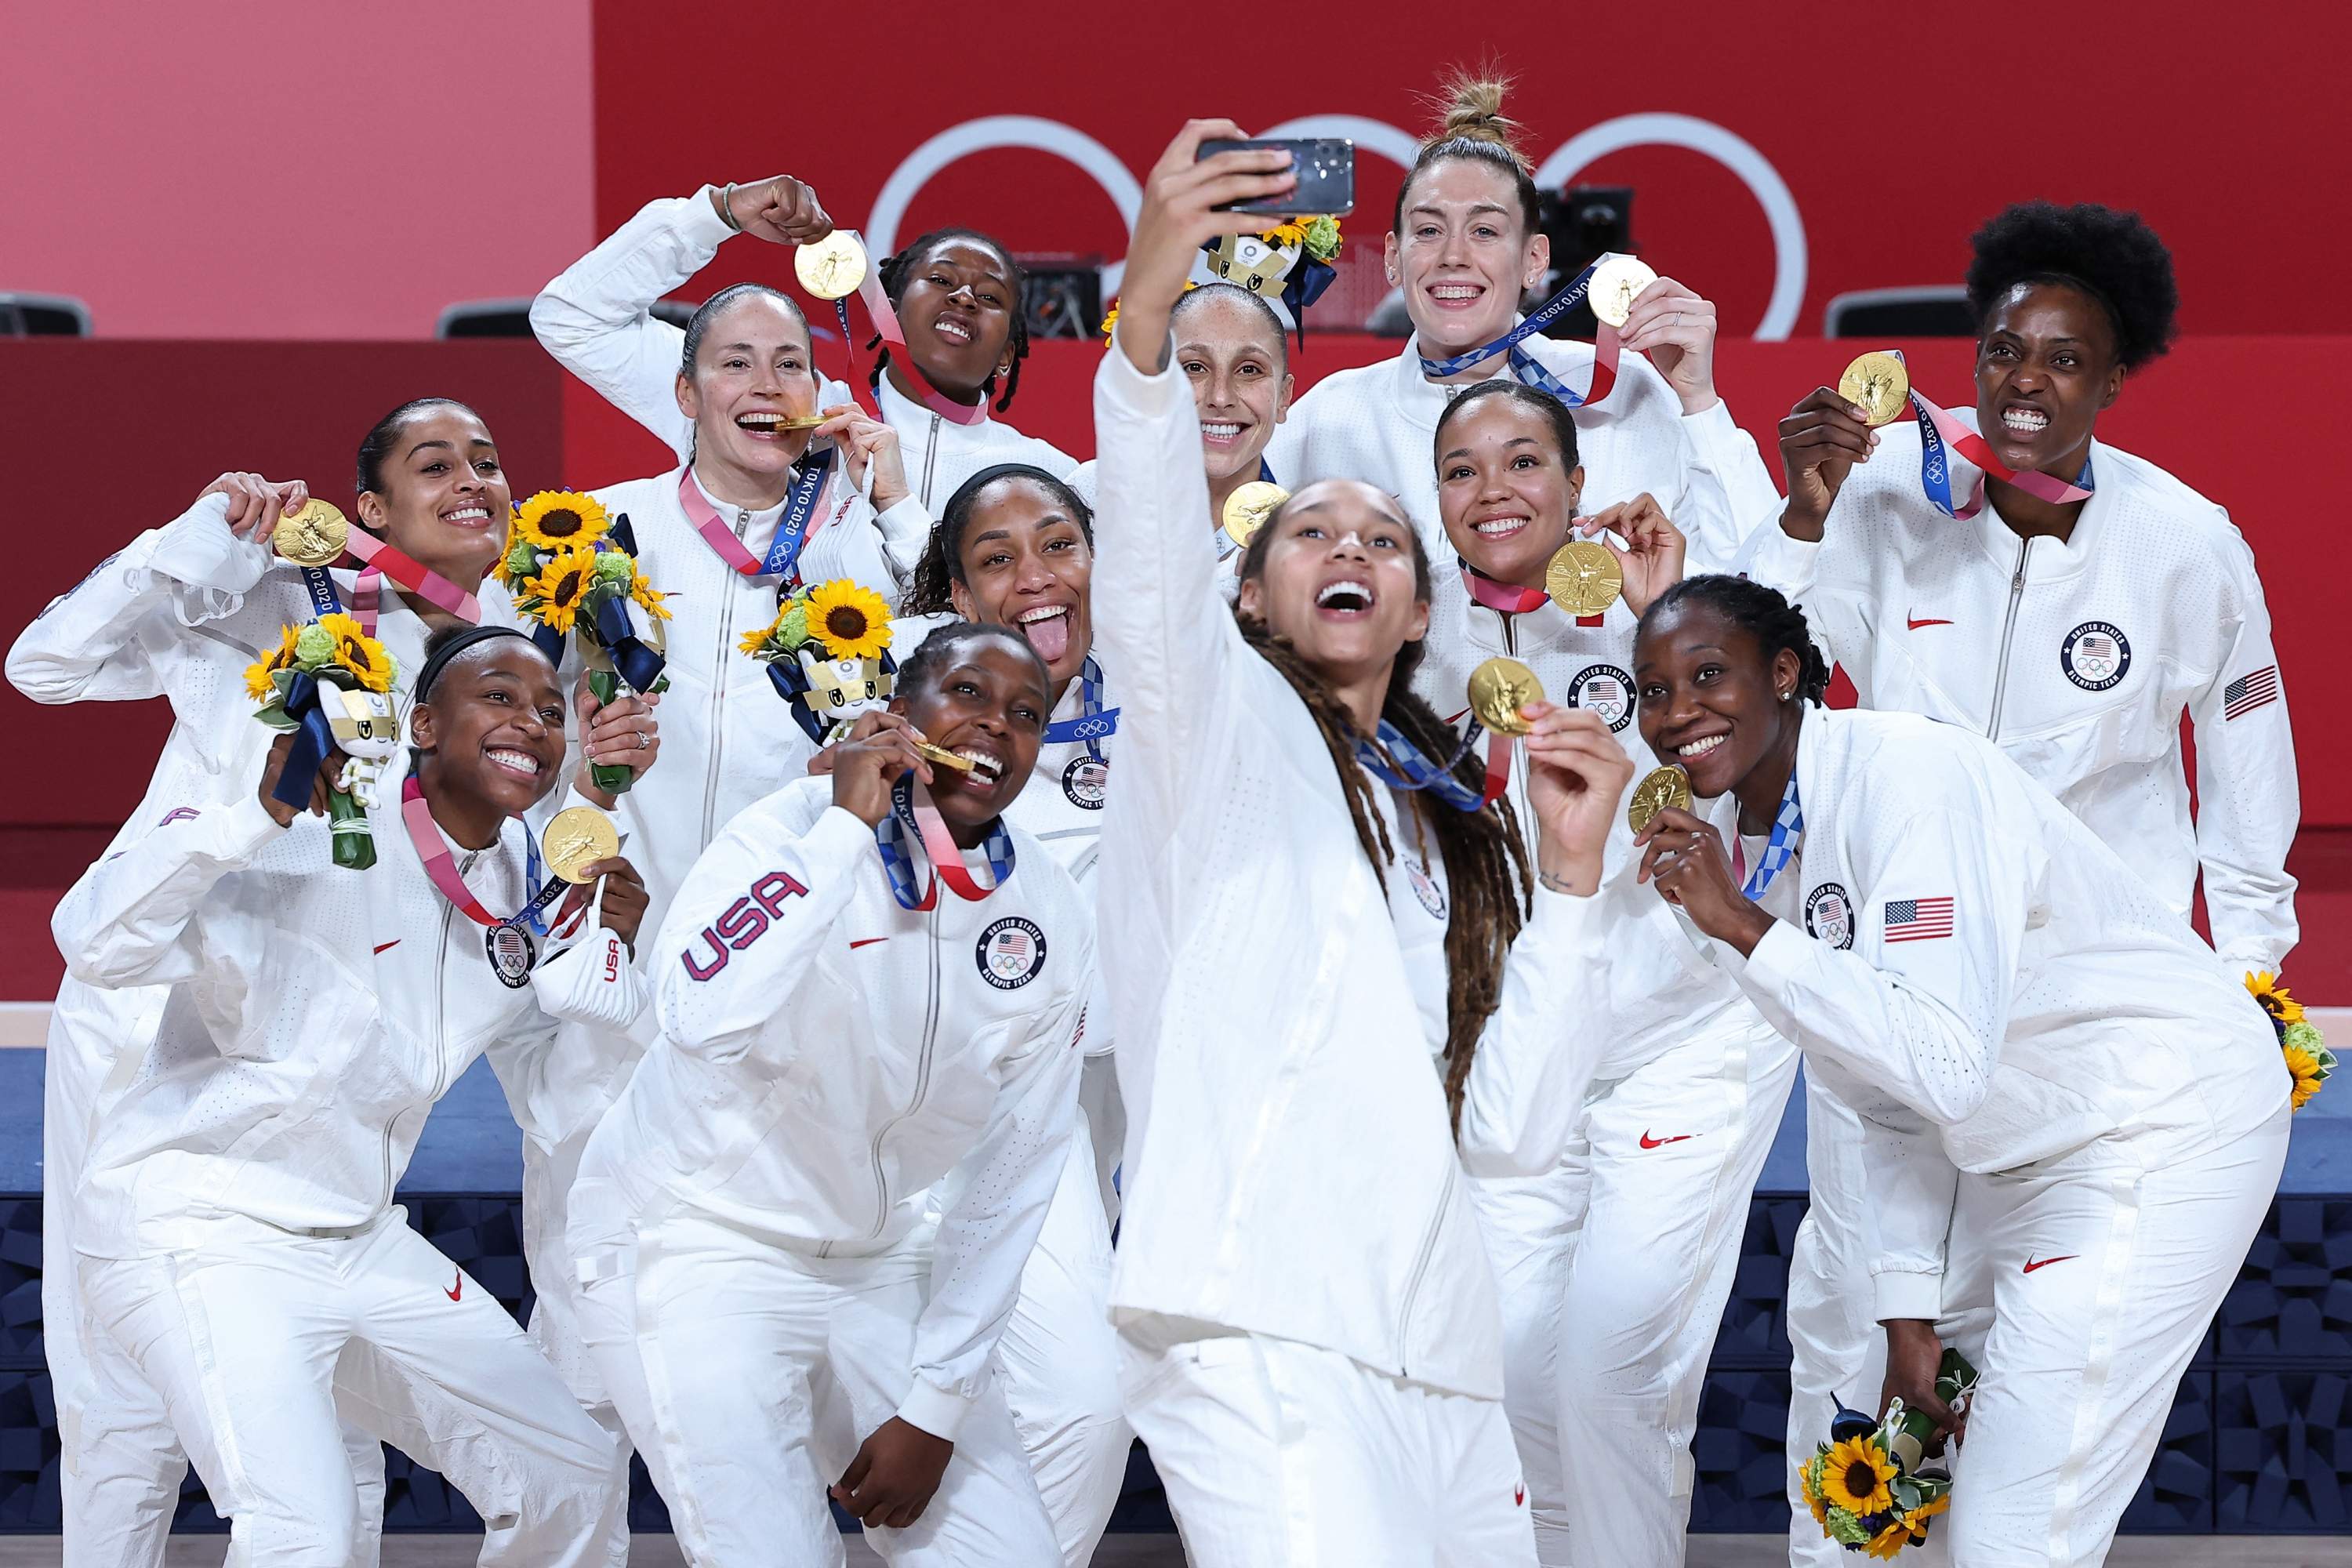 First placed USA's players pose for a selfie with their gold medals during the medal ceremony for the women's basketball competition of the Tokyo 2020 Olympic Games at the Saitama Super Arena in Saitama on August 8, 2021. (Photo by Thomas COEX / AFP)